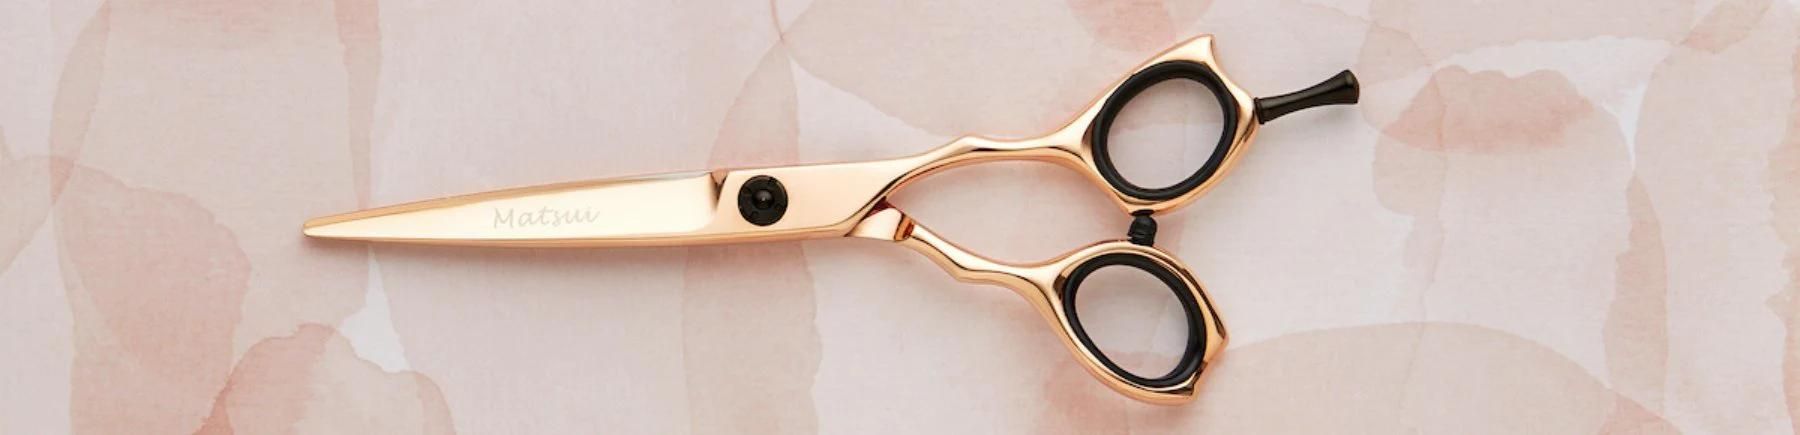 Why You Should Tighten Your Shears Daily